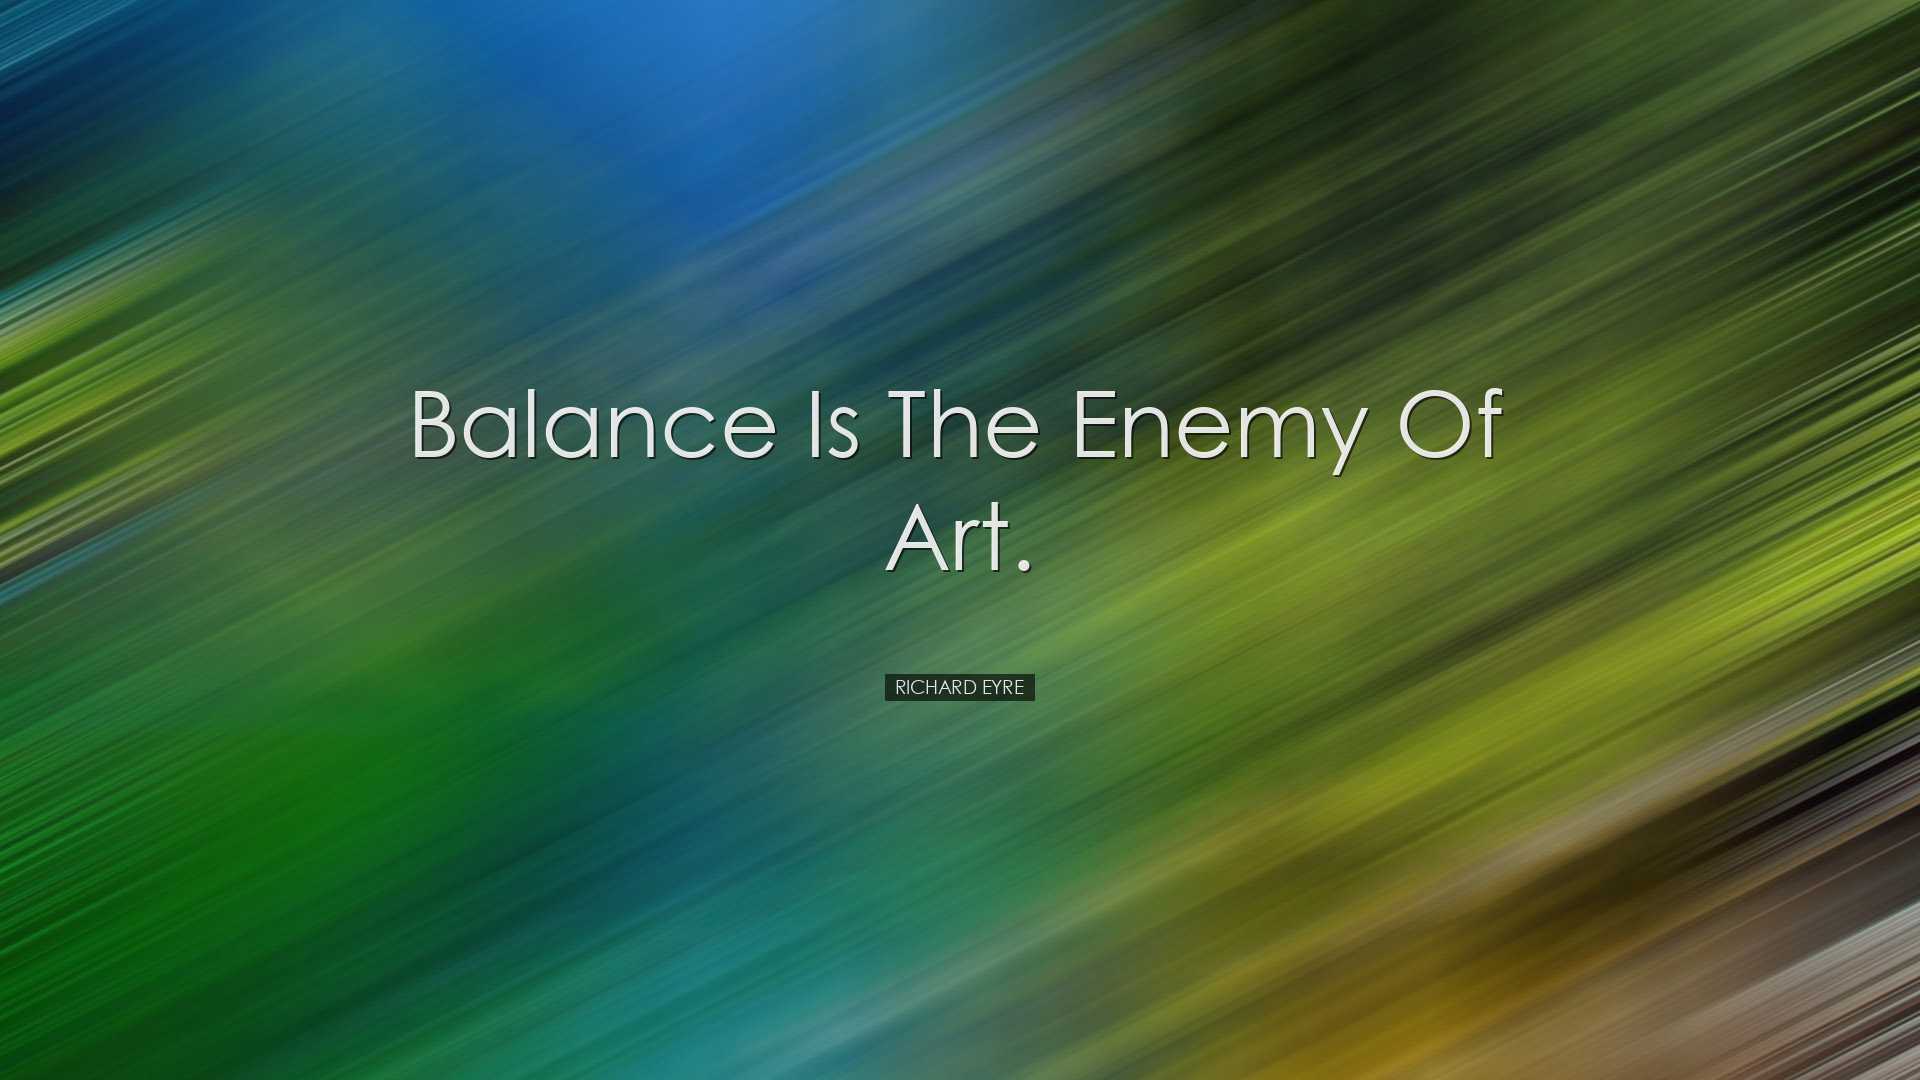 Balance is the enemy of art. - Richard Eyre